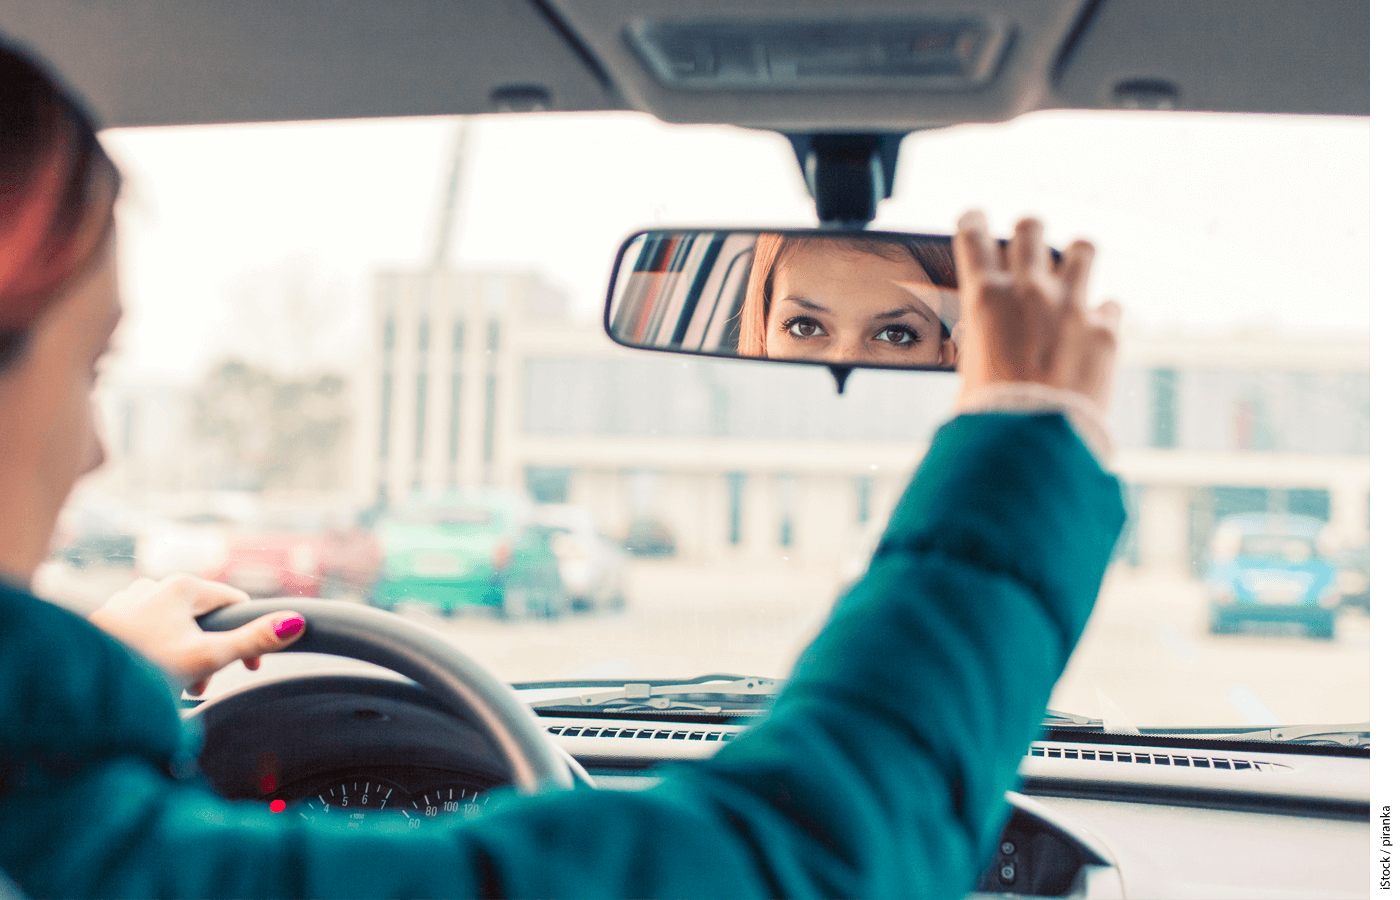 A driver adjusting her rear view mirror